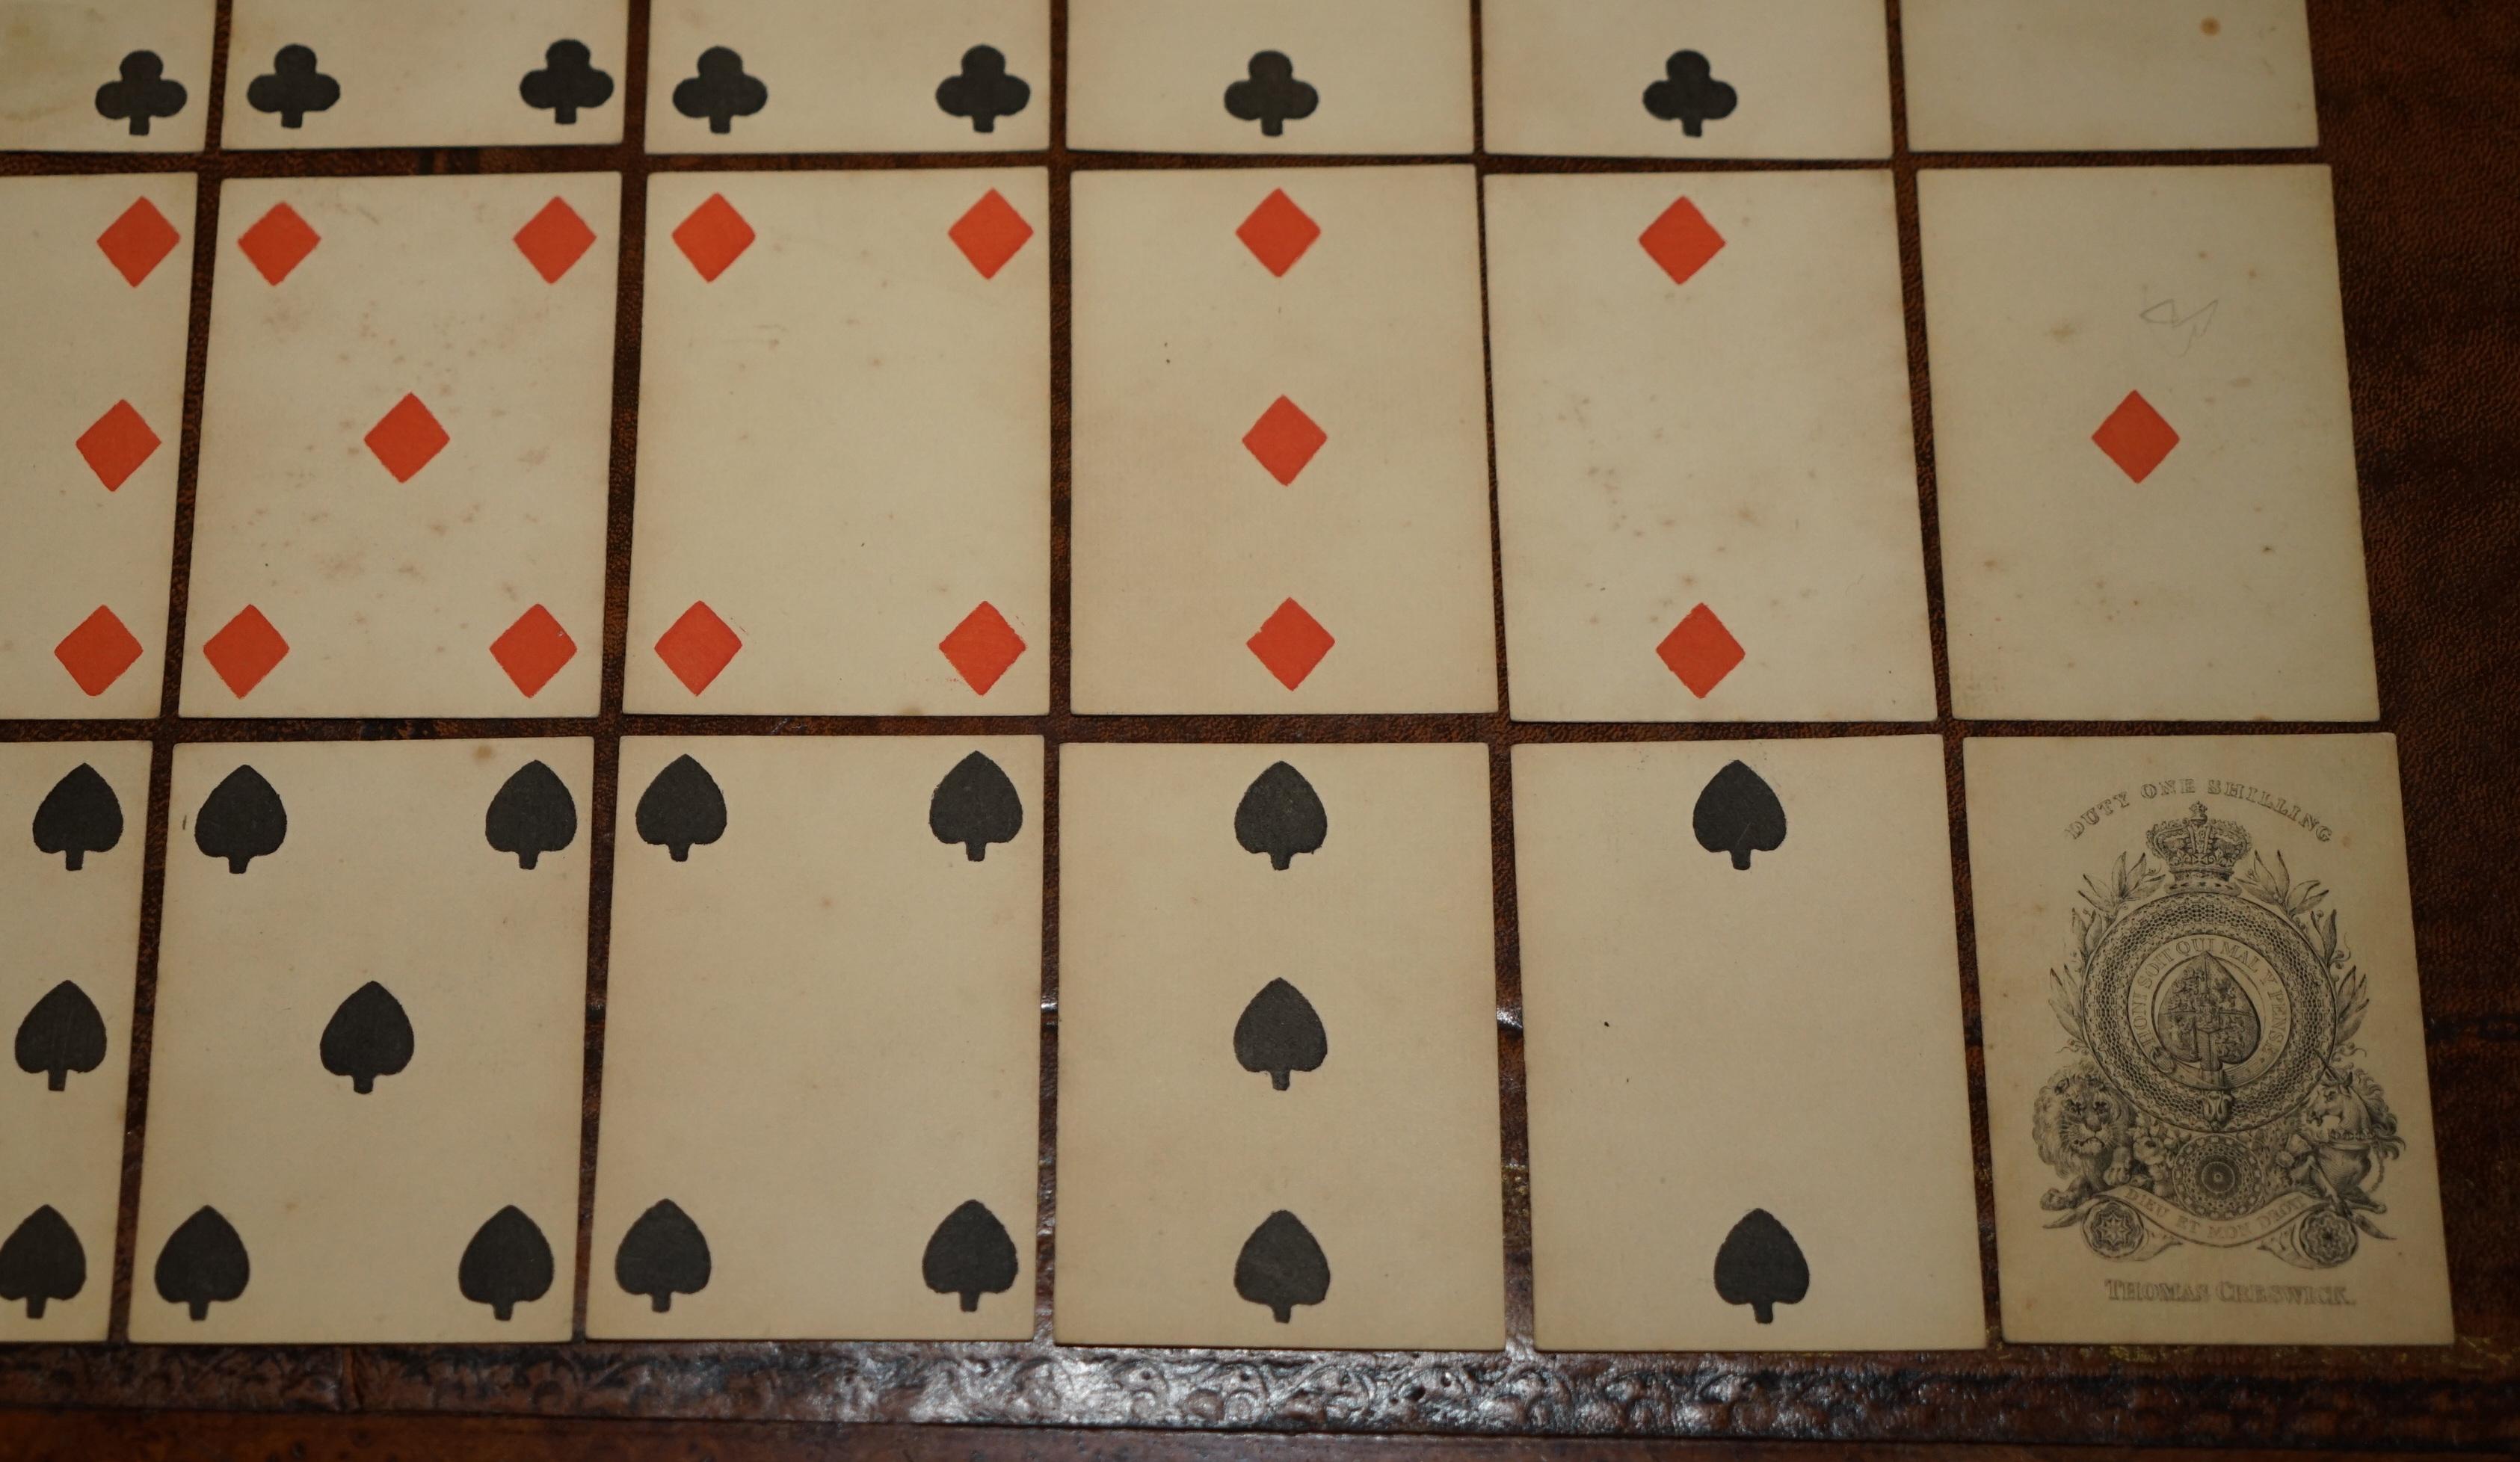 ANTIQUE 1830 THOMAS CRESWICK GEORGIAN PLAYiNG CARDS WITH FIZZLE ACE OF SPADES For Sale 1